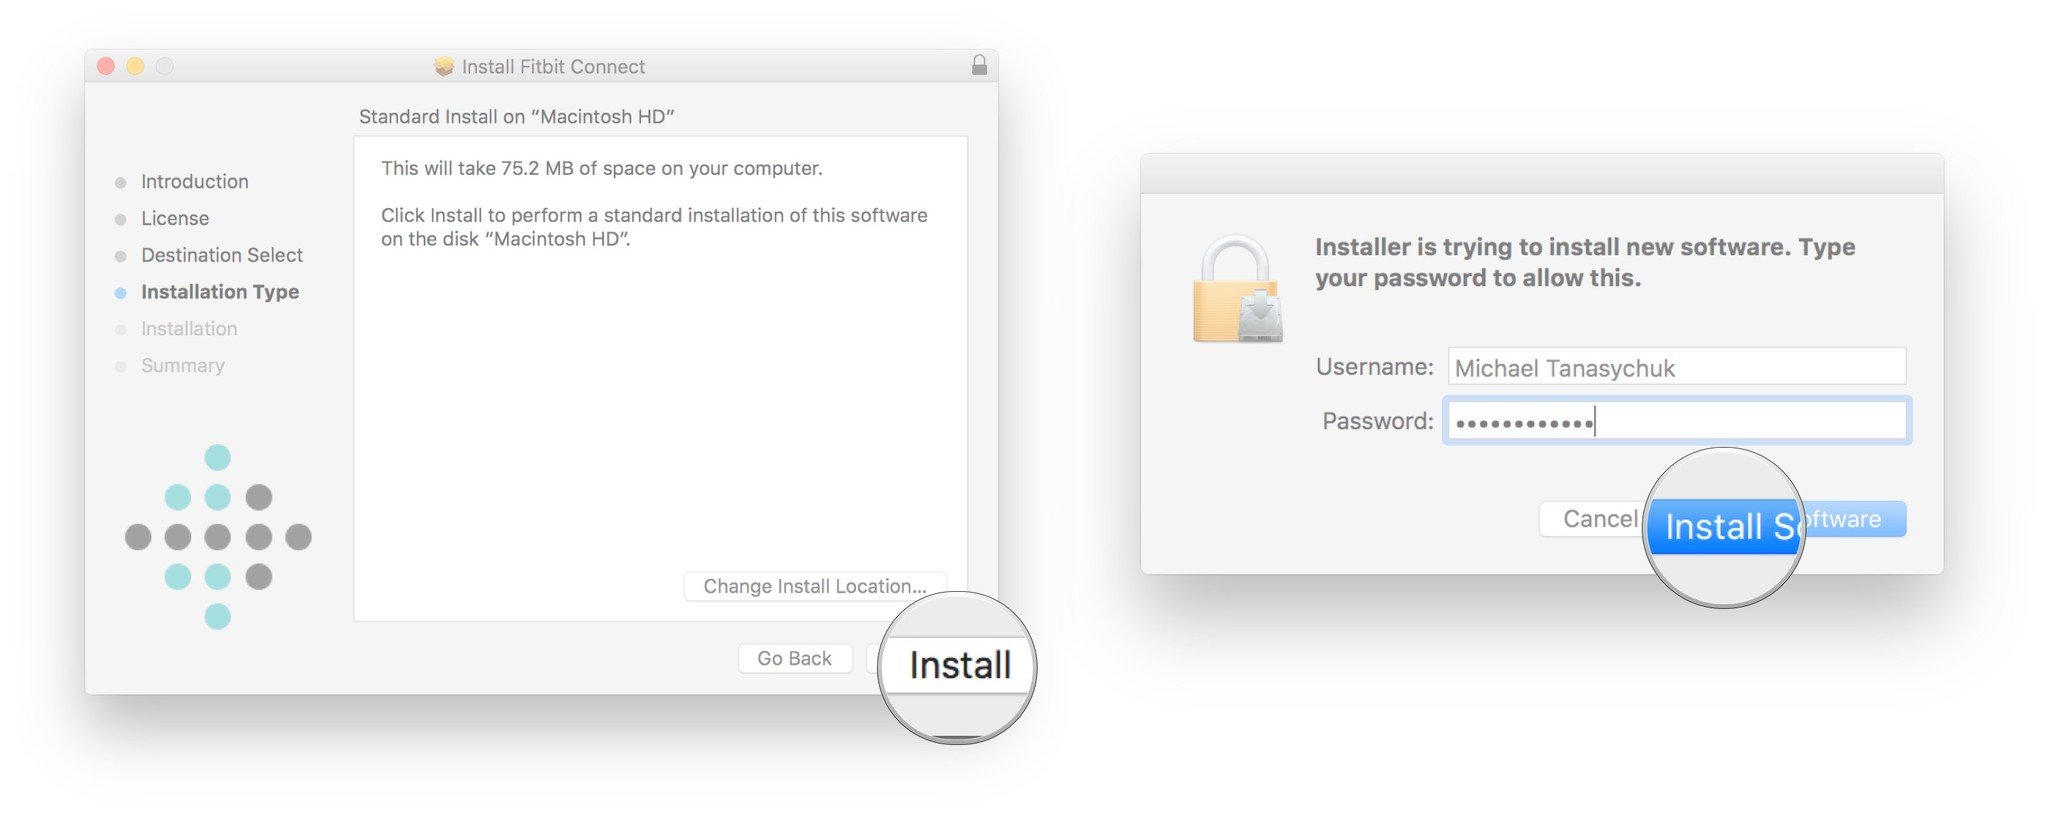 Installation type slection screen and password confirmation to install software